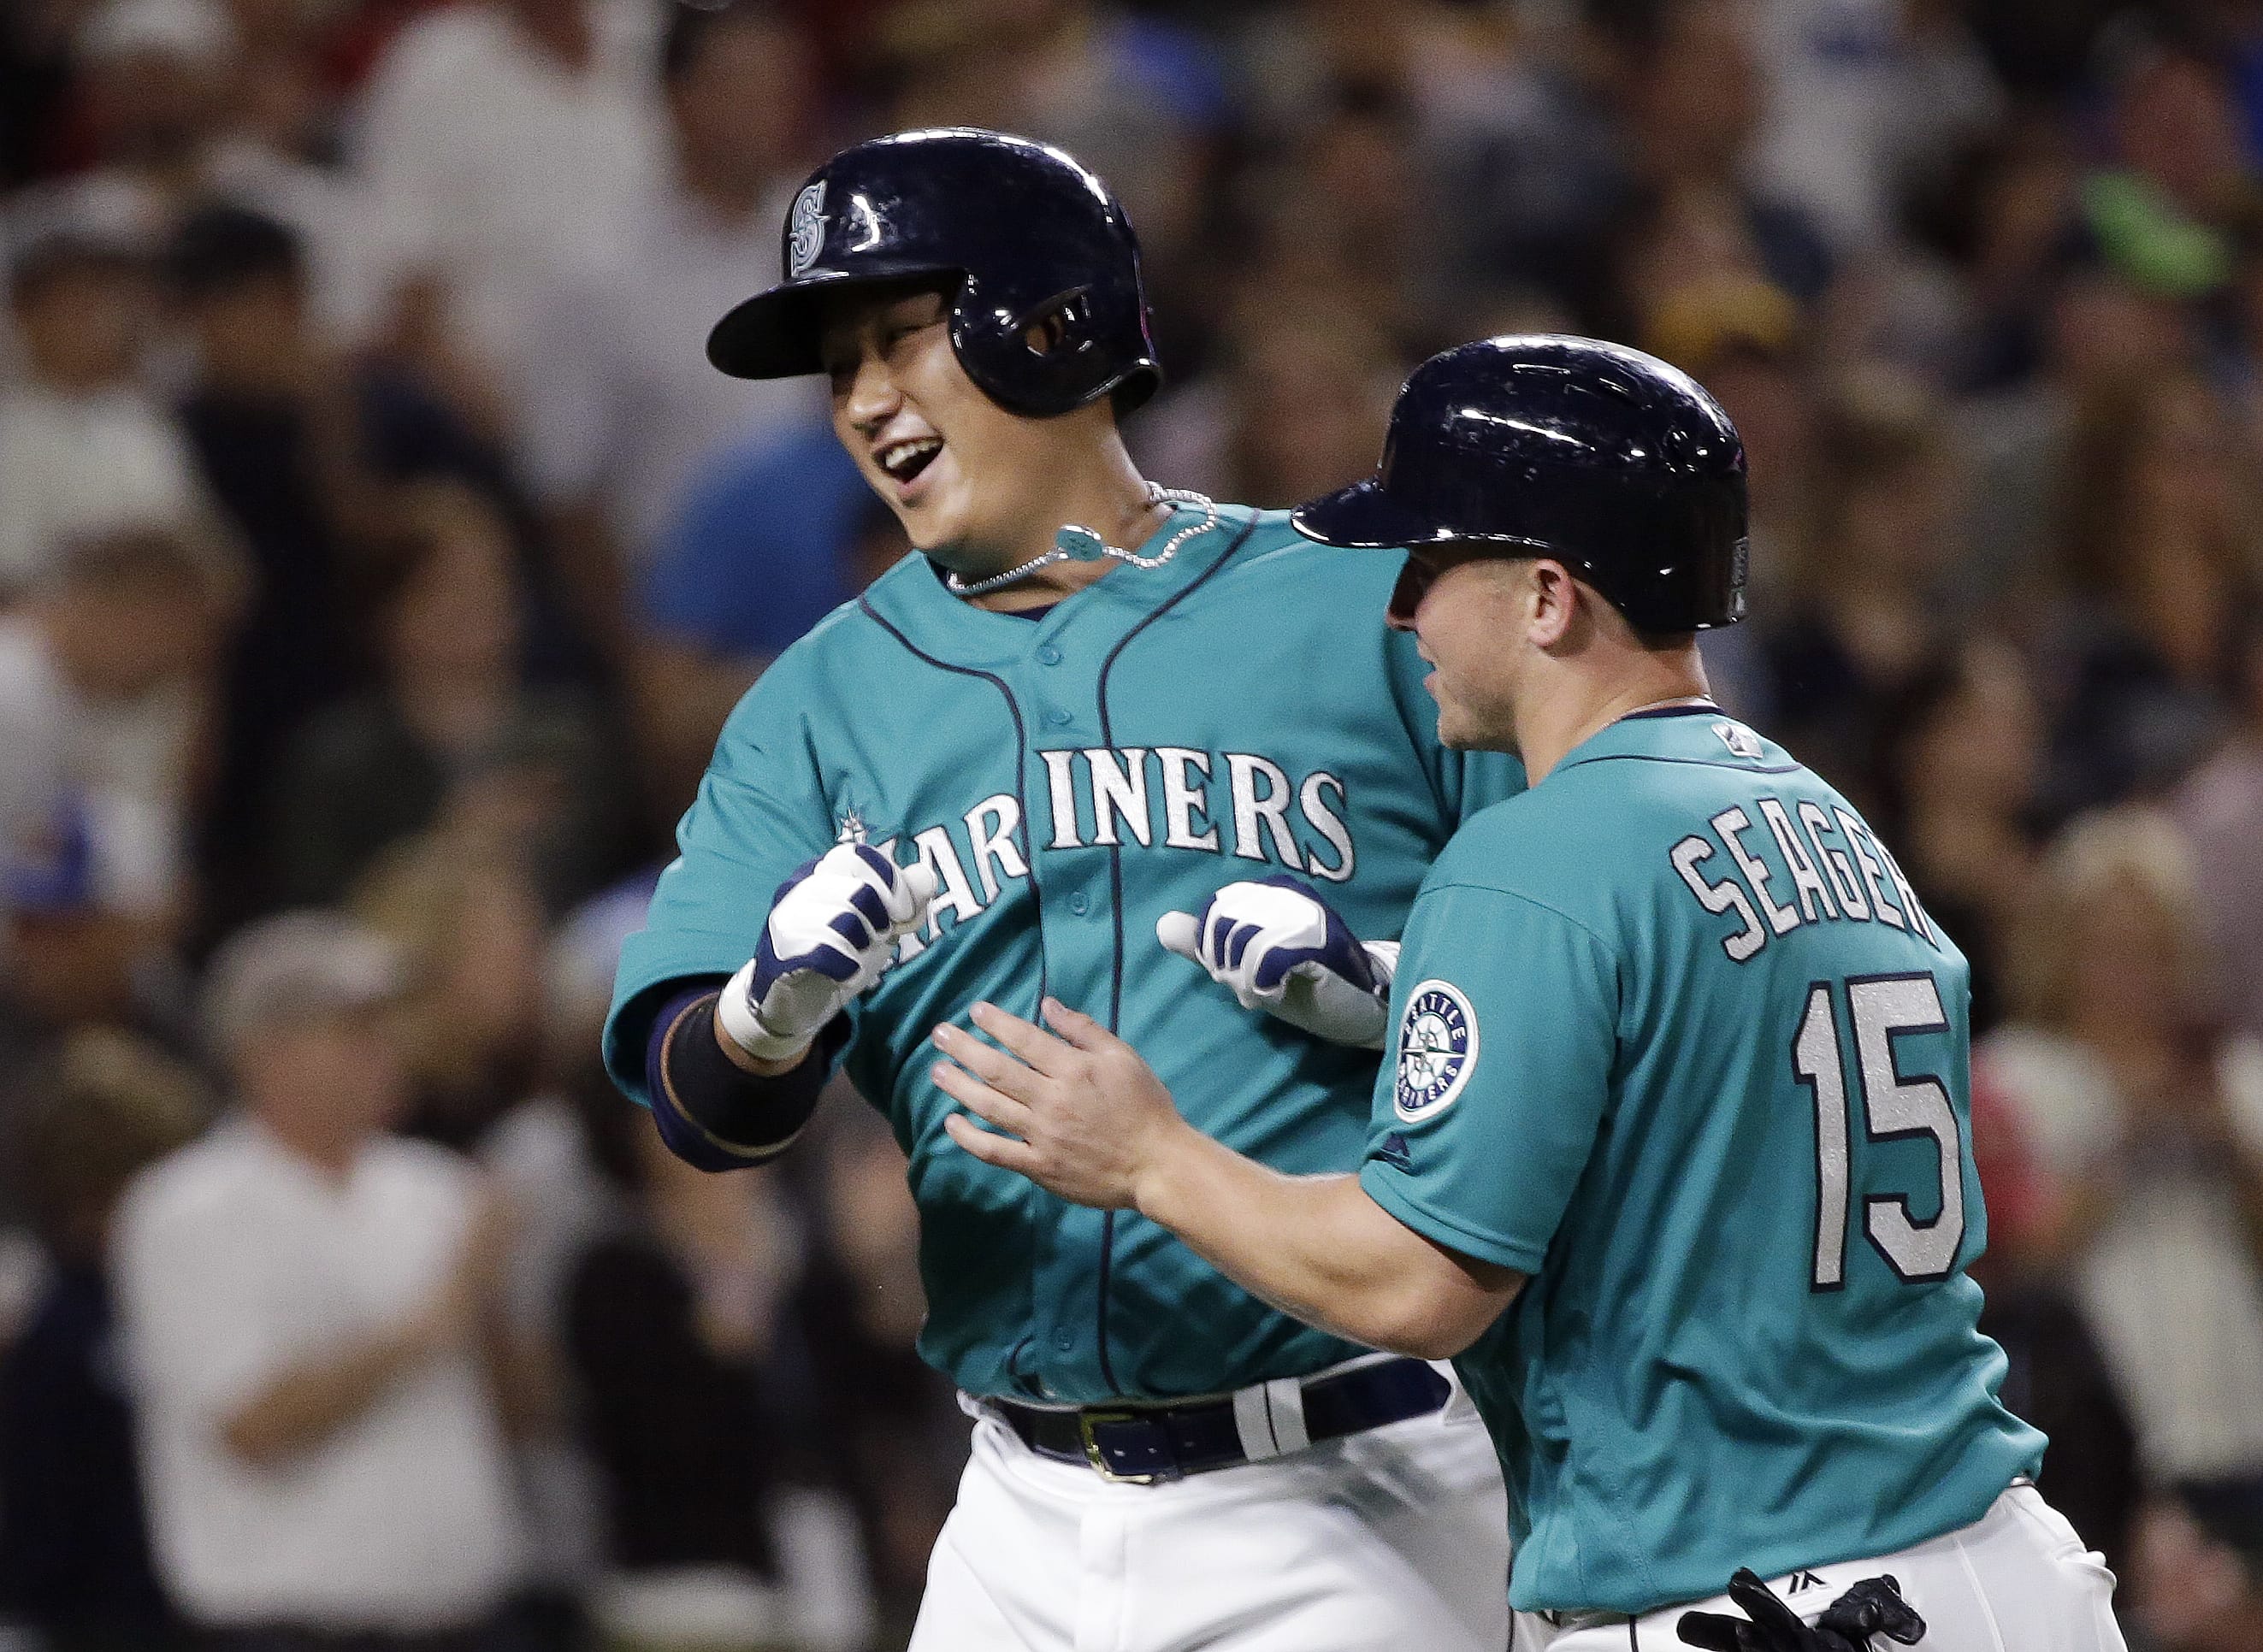 Seattle Mariners' Dae-Ho Lee, left, is met at home by Kyle Seager on his two-run home run against the Baltimore Orioles during the eighth inning of a baseball game Friday, July 1, 2016, in Seattle. The Mariners won 5-2.